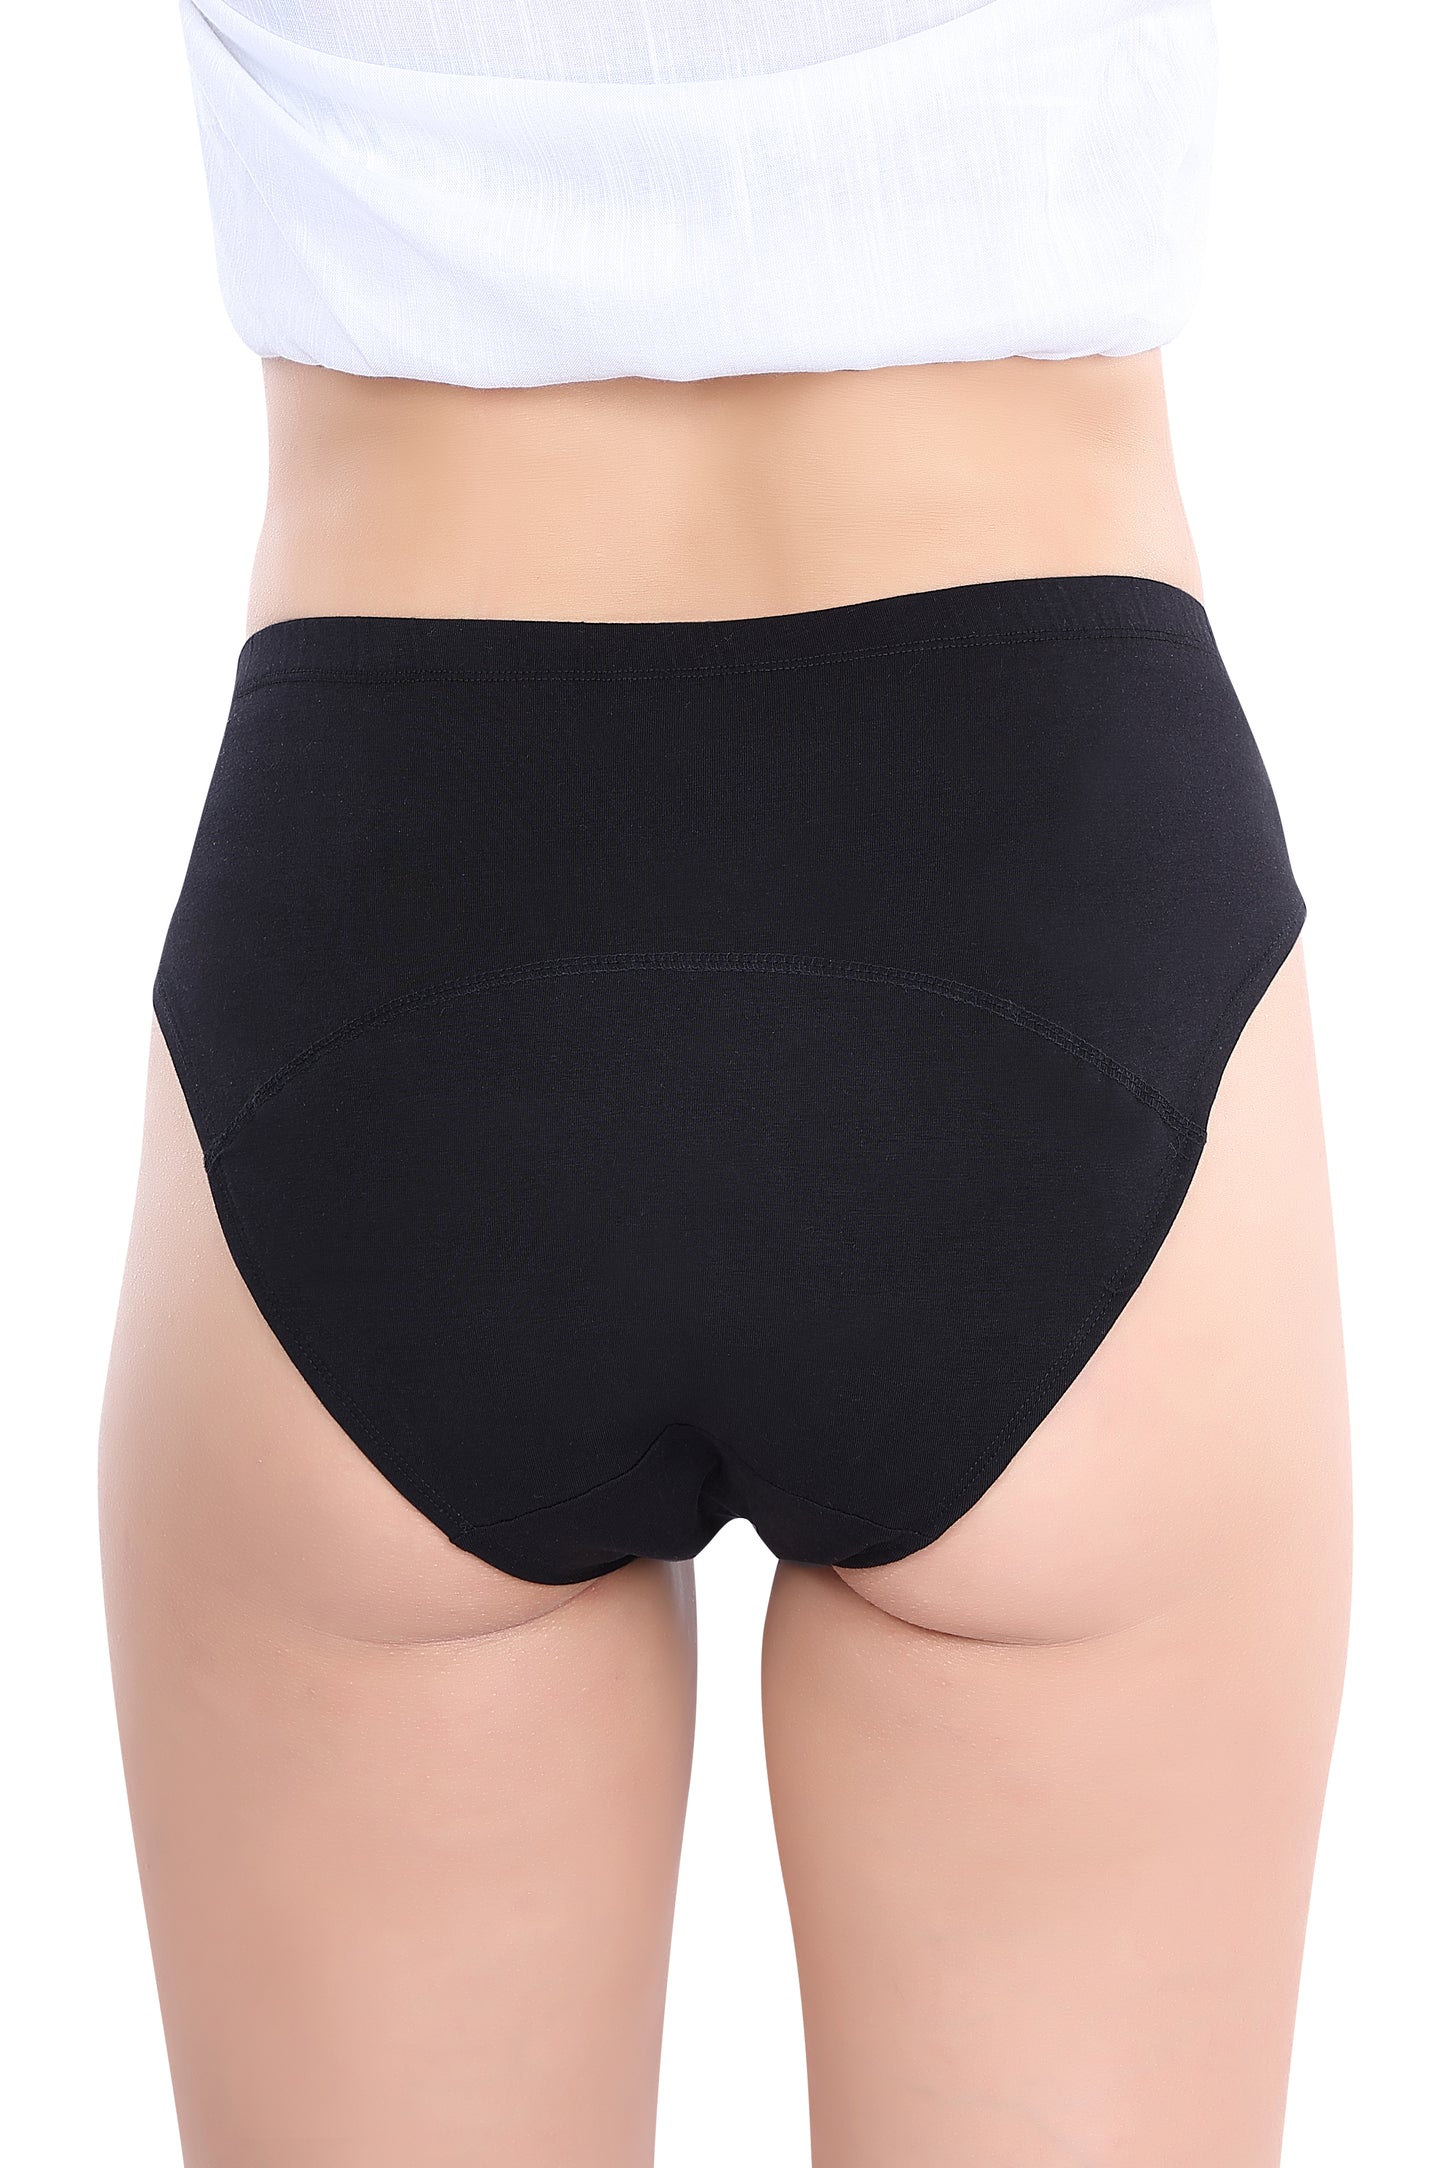 PERIOD PANTY / NO LEAK / COMFORT WEAR FOR PERIODS / HIGHLY ABSORBANT